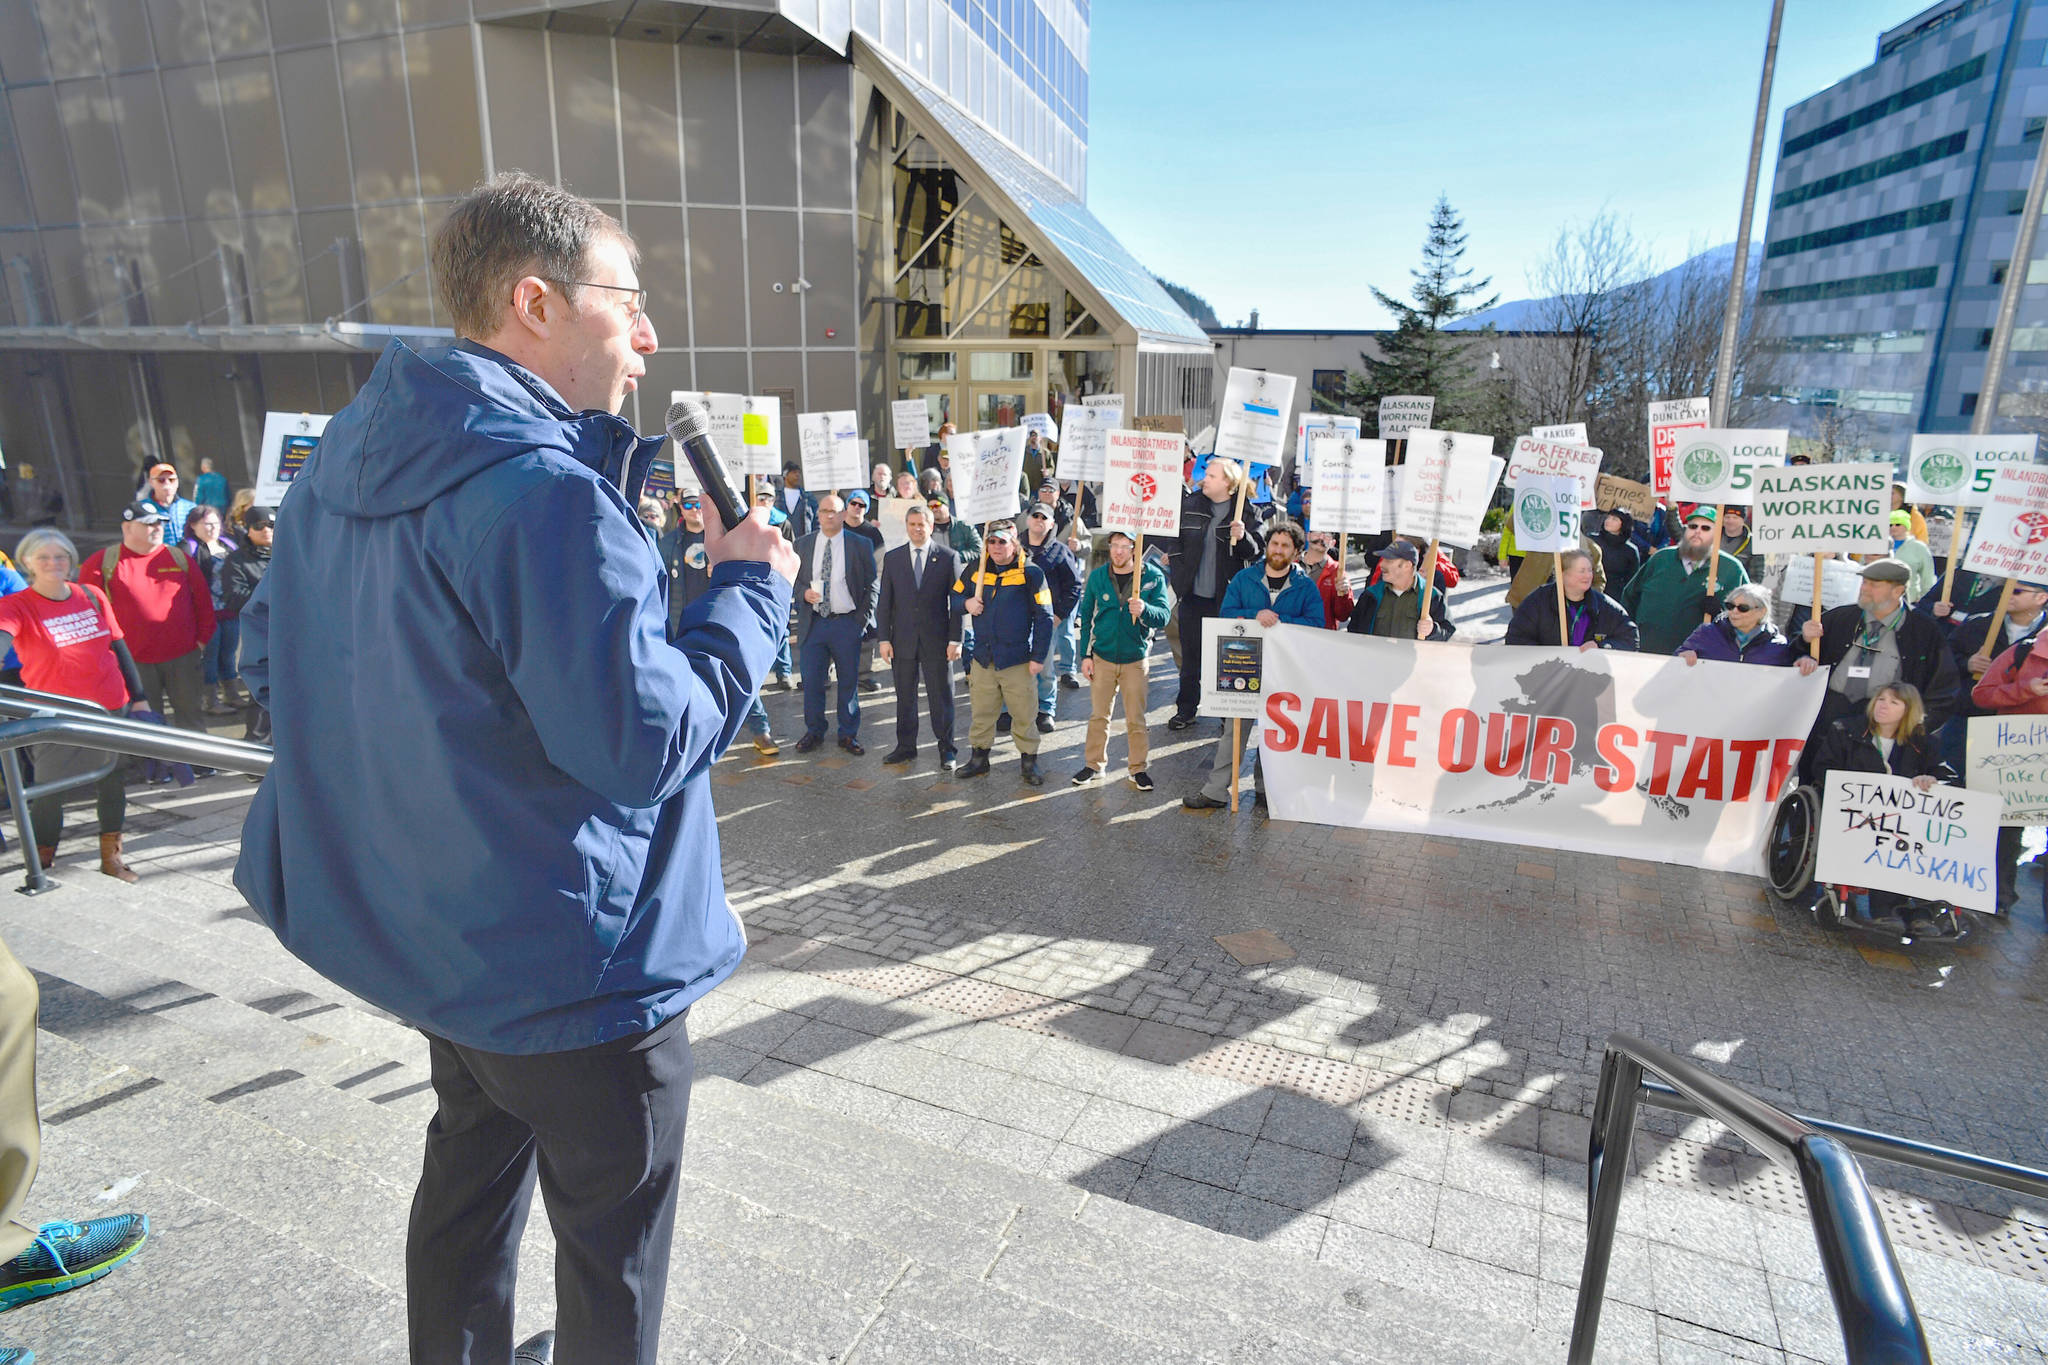 About 150 union workers and their supporters rallied in support of state wokers, in front of the Alaska State Capitol. Members of the Inland Boatman’s Union were there to support the Alaska Marine Highway System. (Kevin Baird | Juneau Empire)